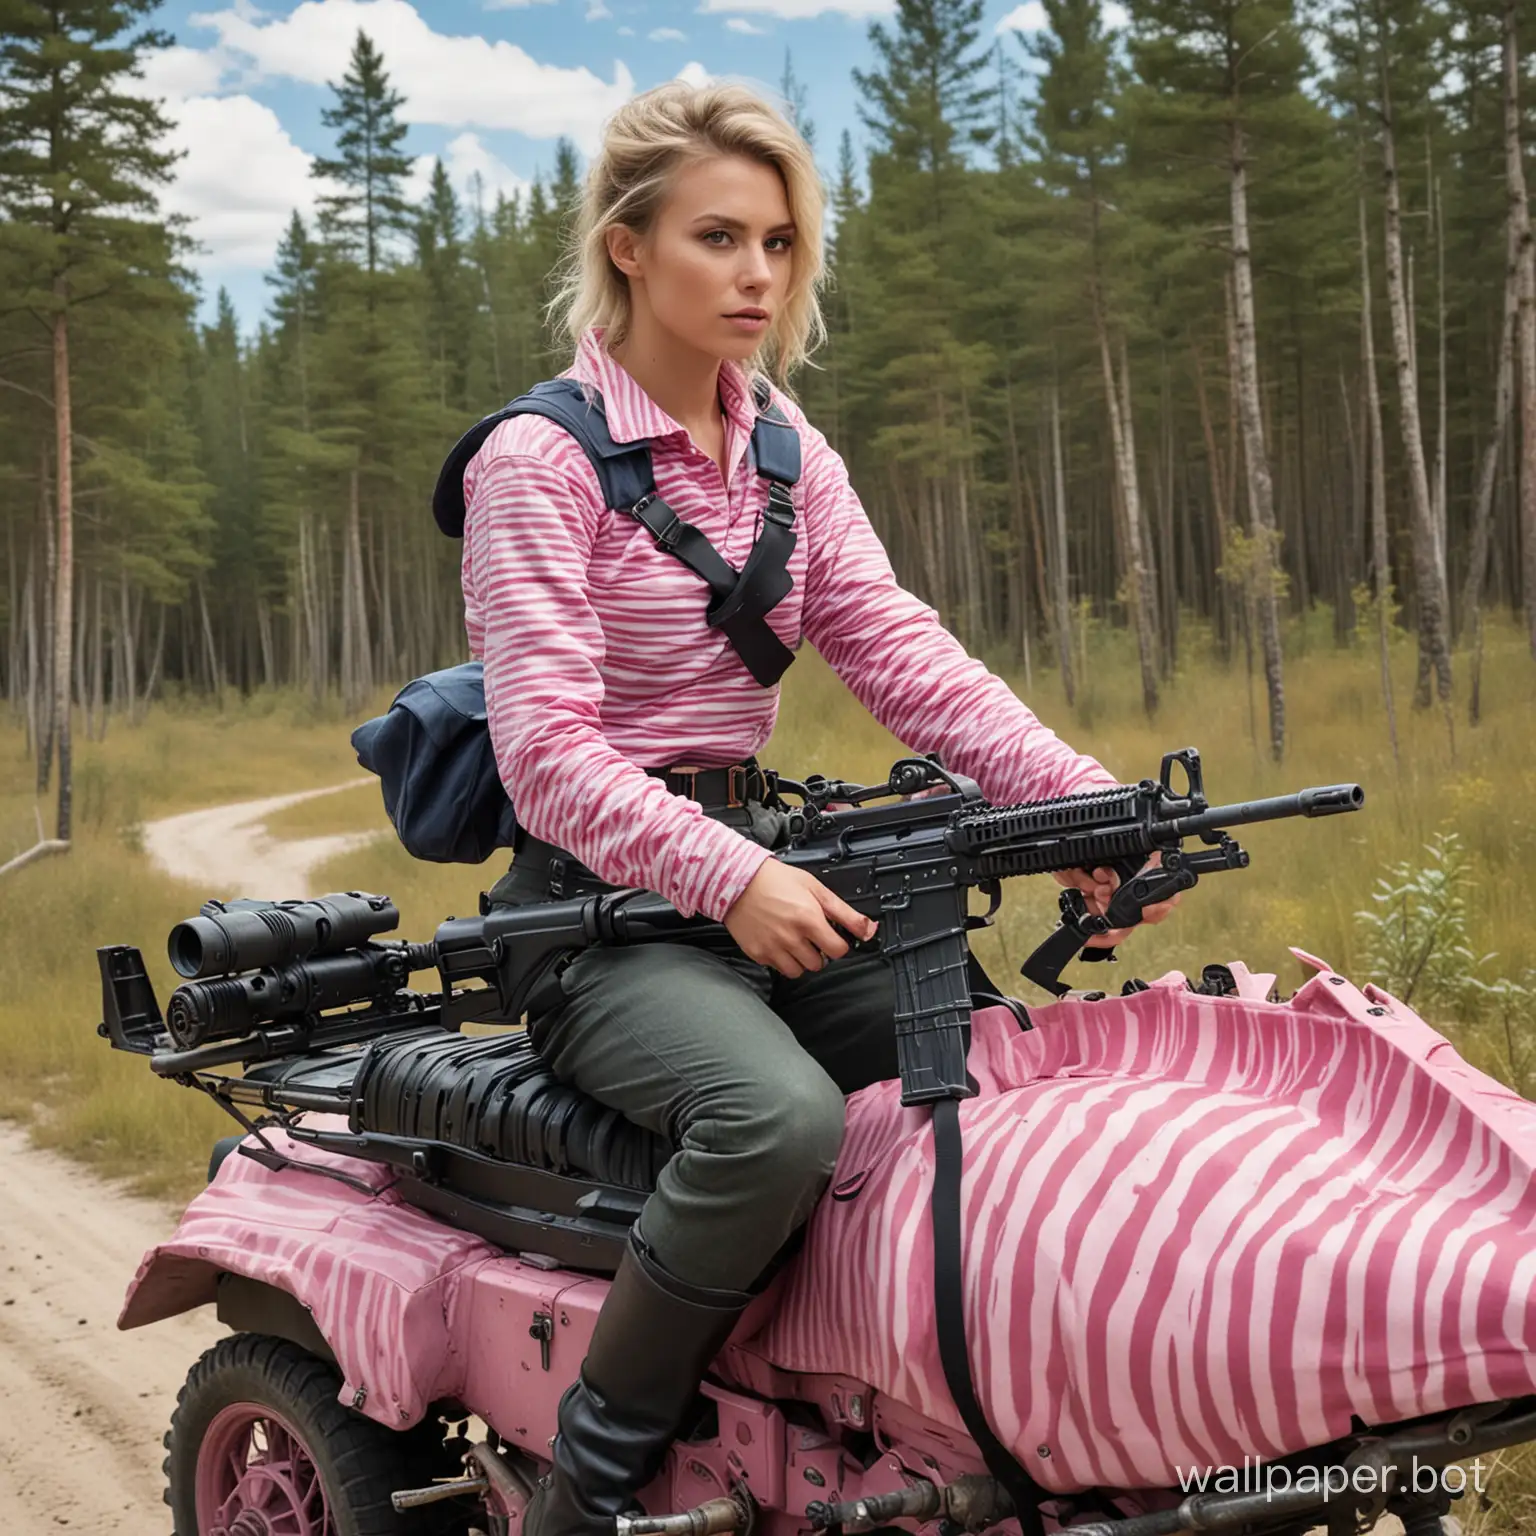 sailor in a striped shirt, riding on a pink zebra with a machine gun in the taiga.